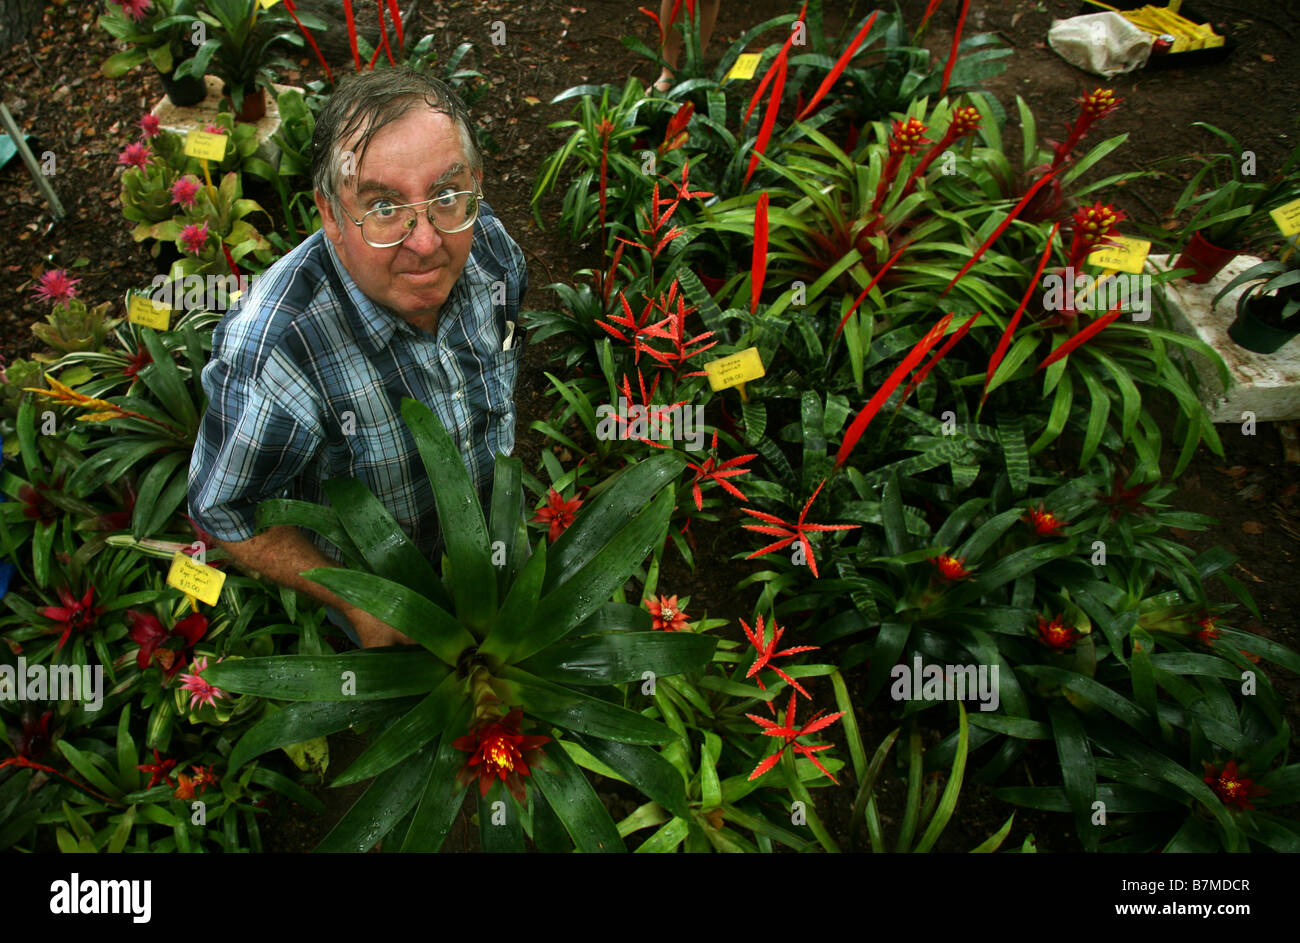 Chris Underhill with some of his Bromeliads and other exotic plants that he sells at Bangalow and Byron Bay markets in Australia Stock Photo